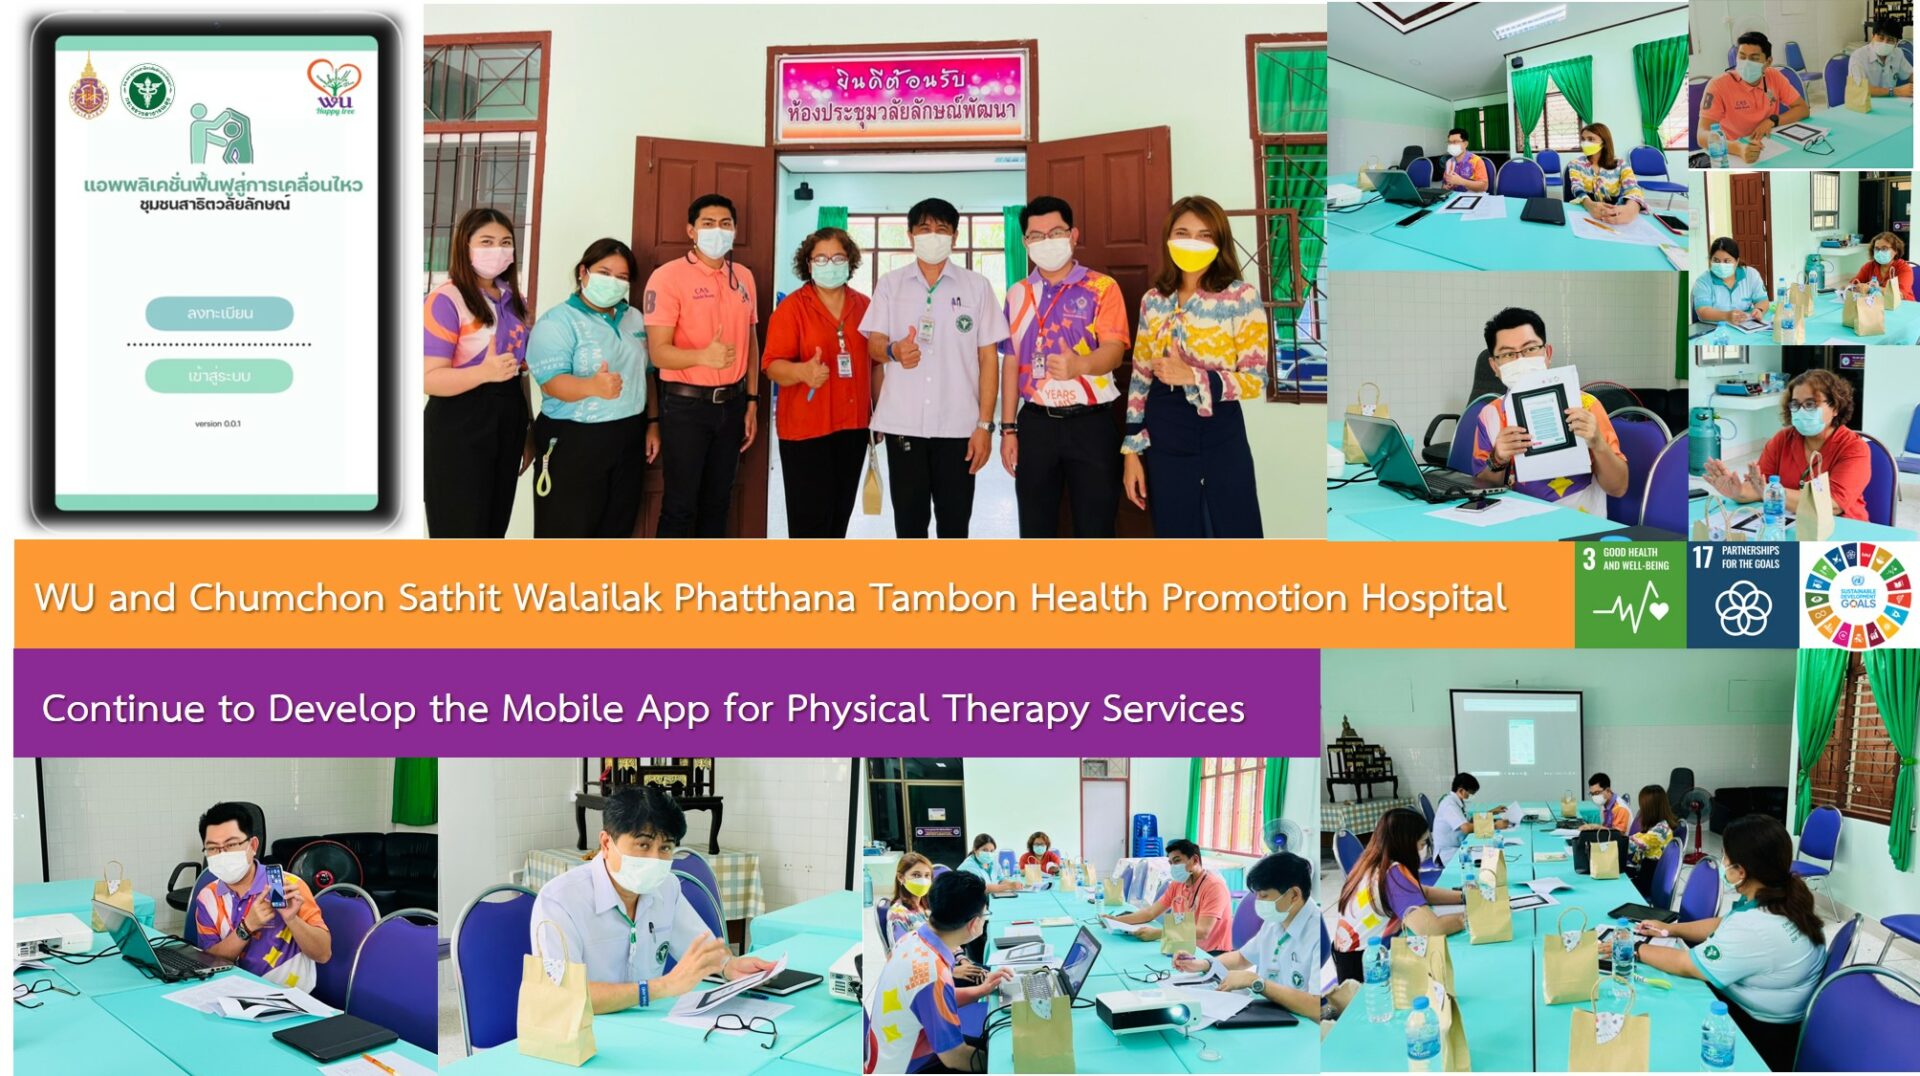 WU and Chumchon Sathit Walailak Phatthana Tambon Health Promotion Hospital Continue to Develop the Mobile App for Physical Therapy Services